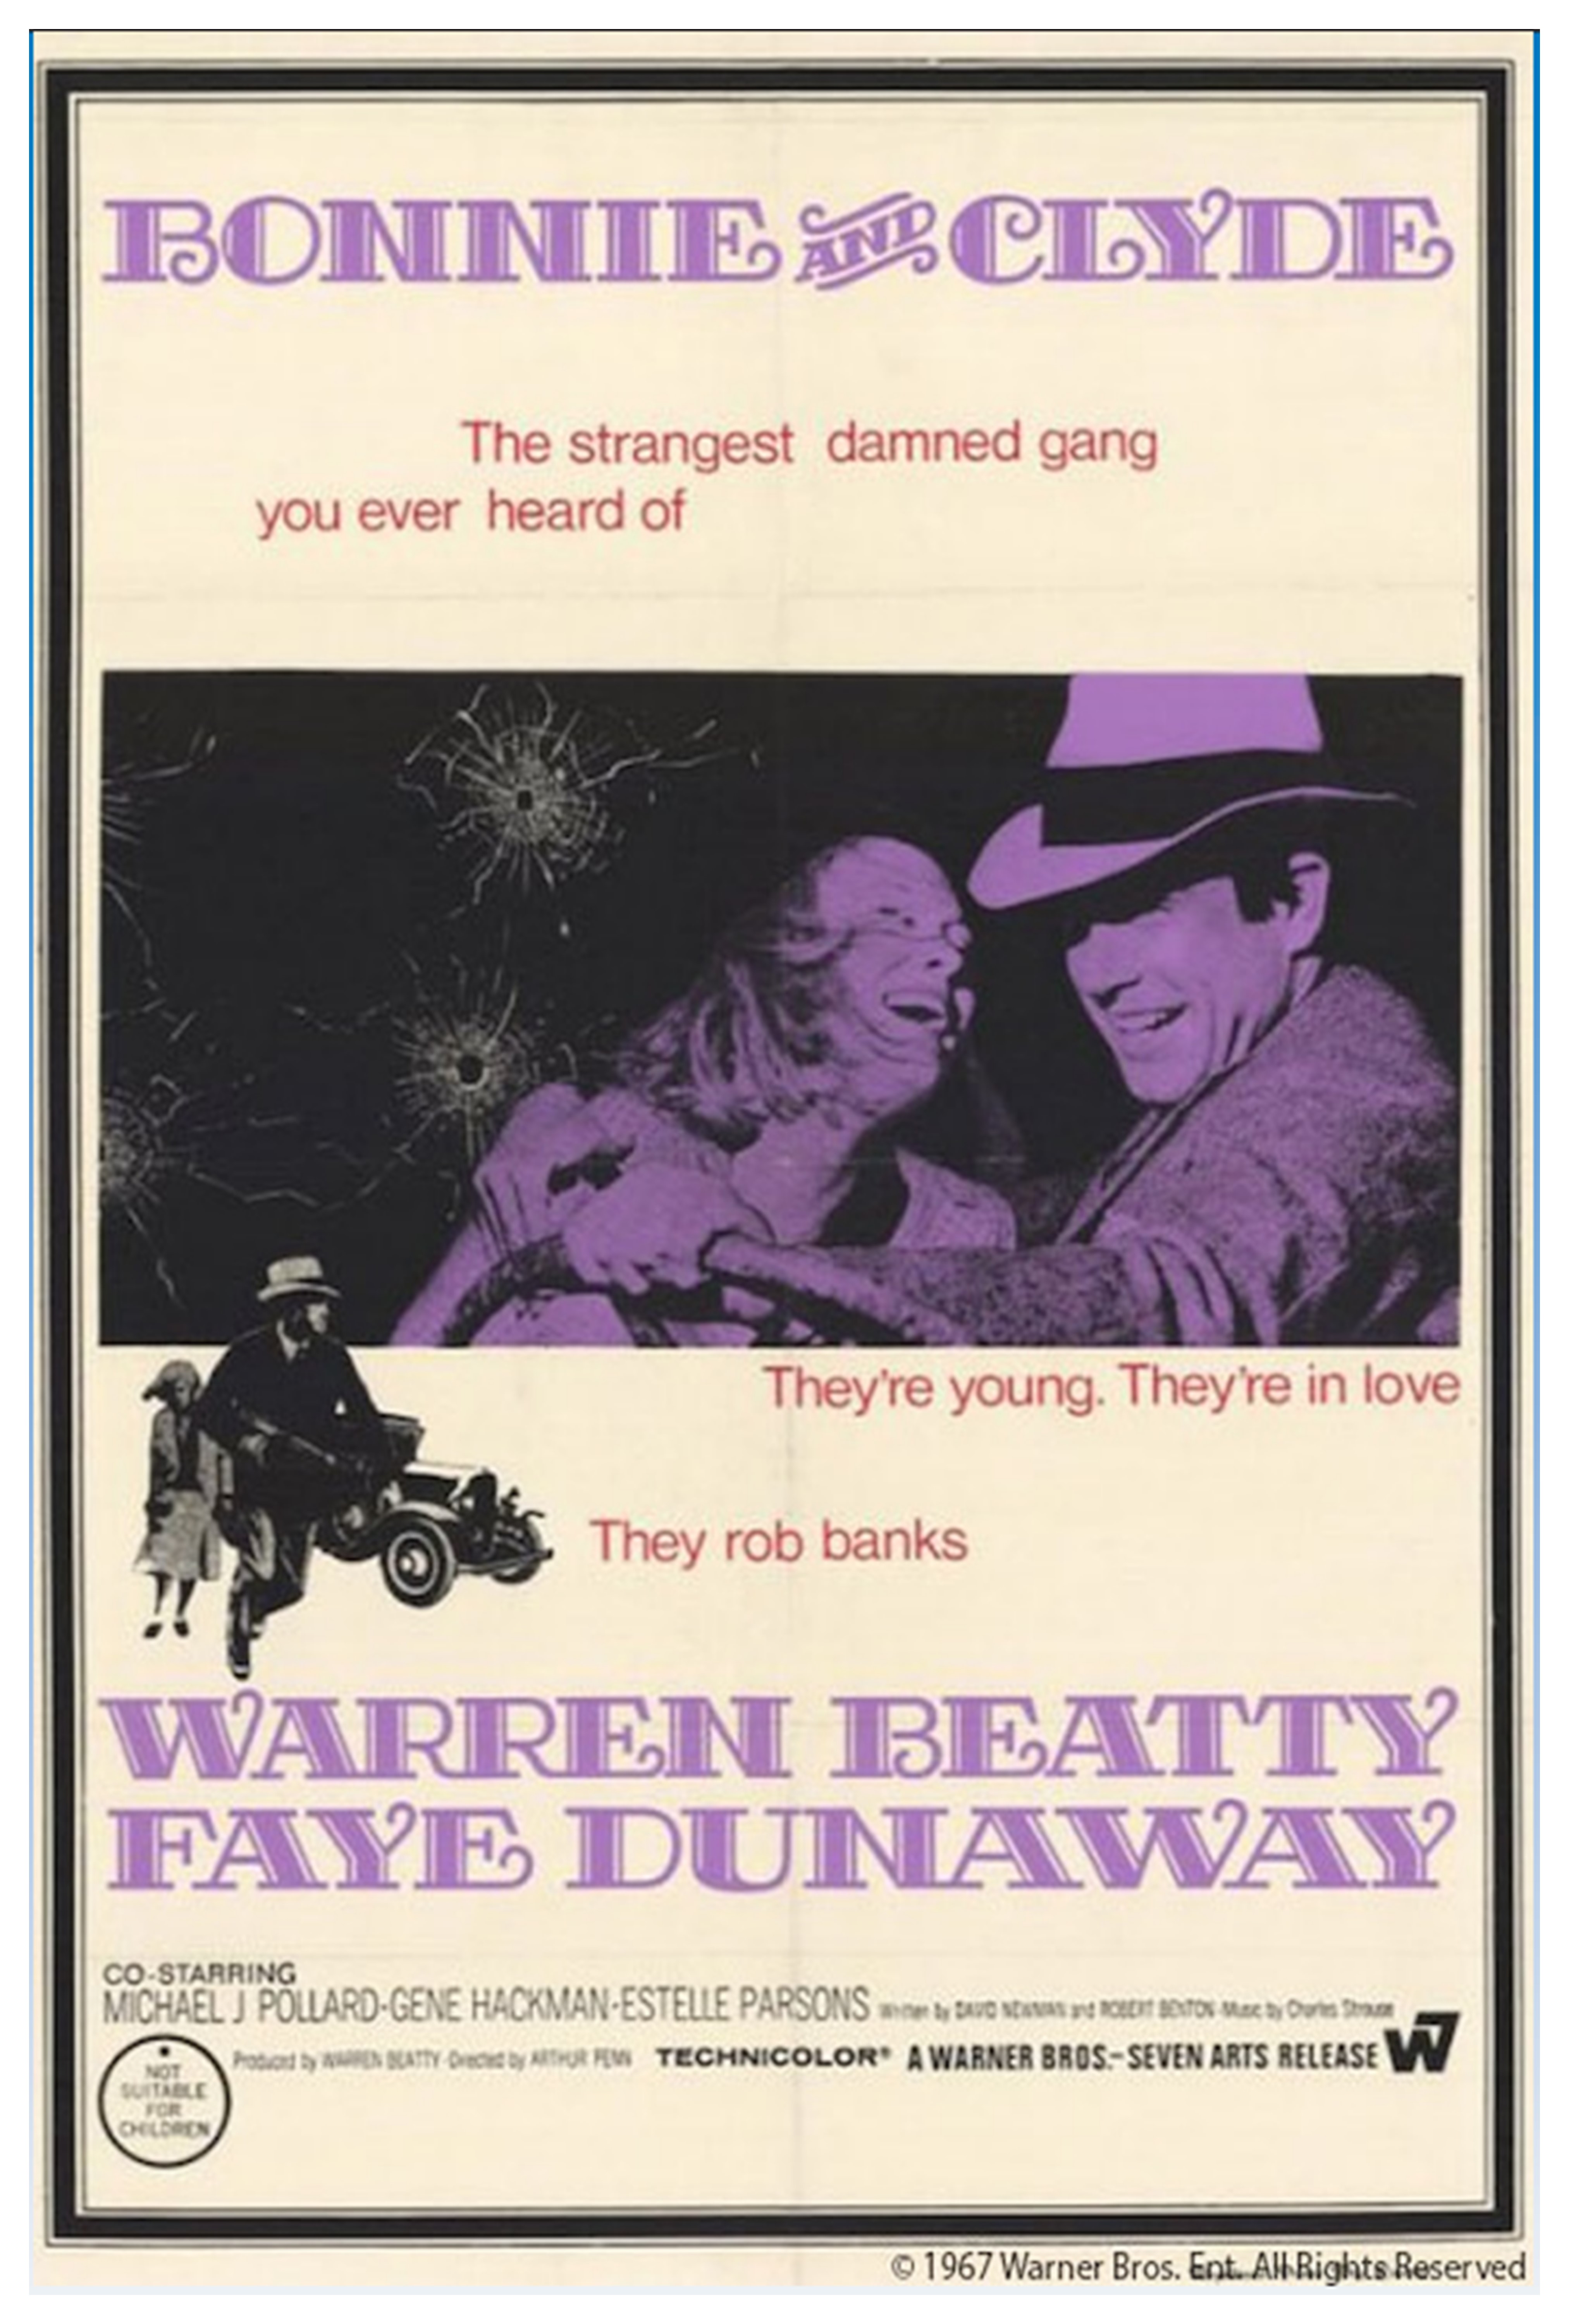 Film poster for Bonnie and Clyde with purple letters on a cream background showing a purple-colorized photo of the two main characters laughing.